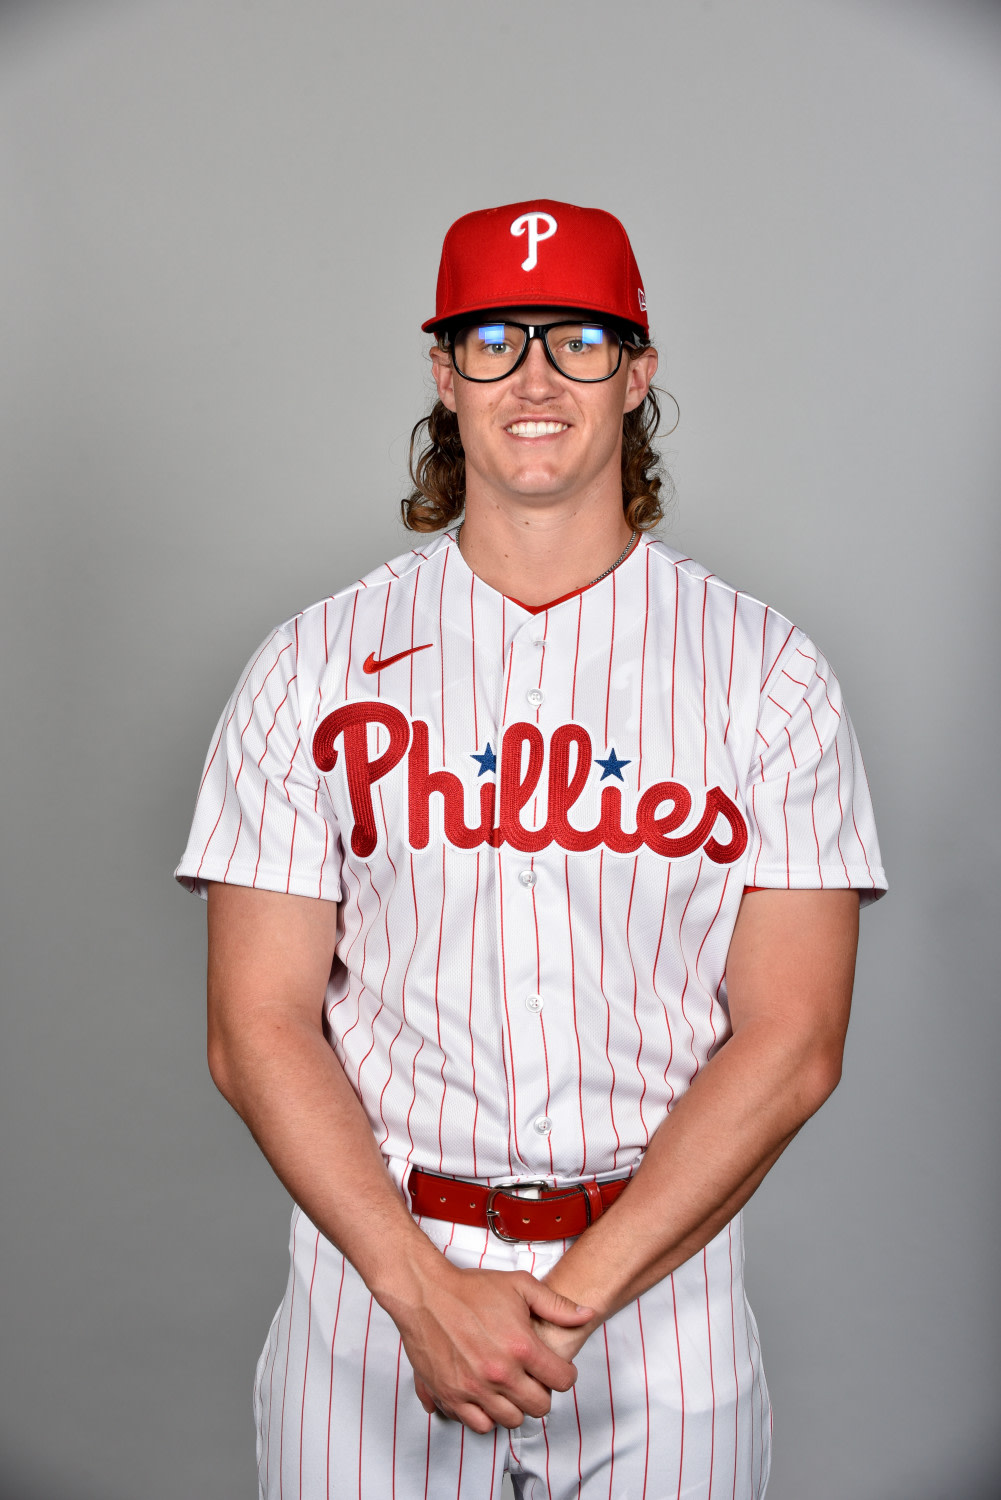 10 best flows from MLB photo day